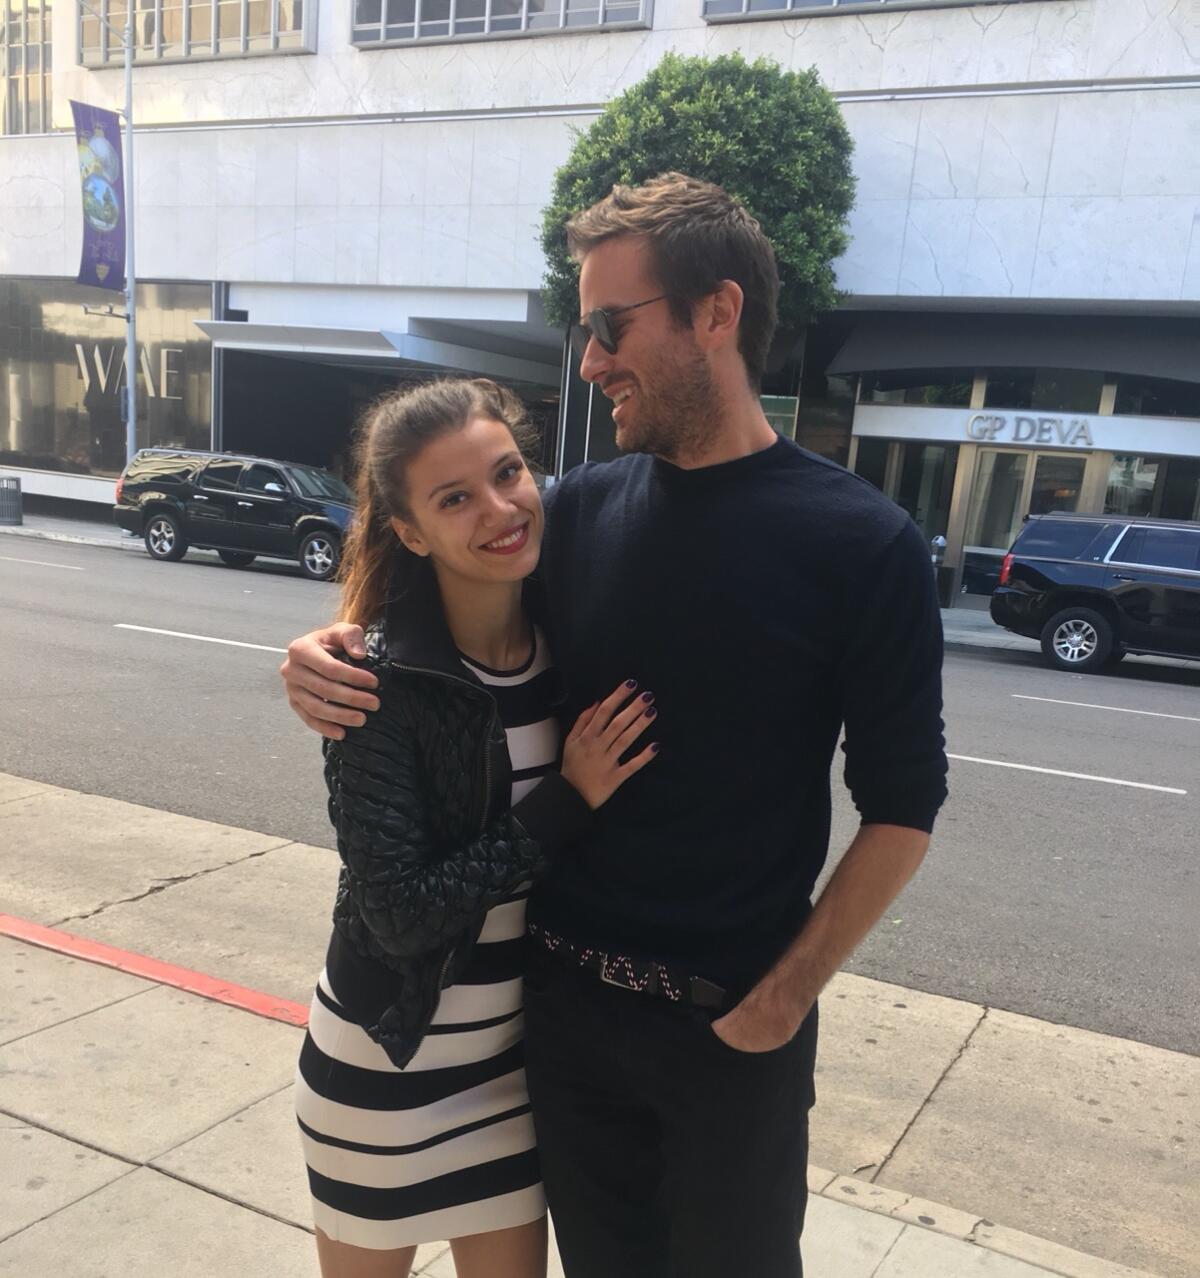 Effie, who claims Armie Hammer raped in her in 2017, with the actor.